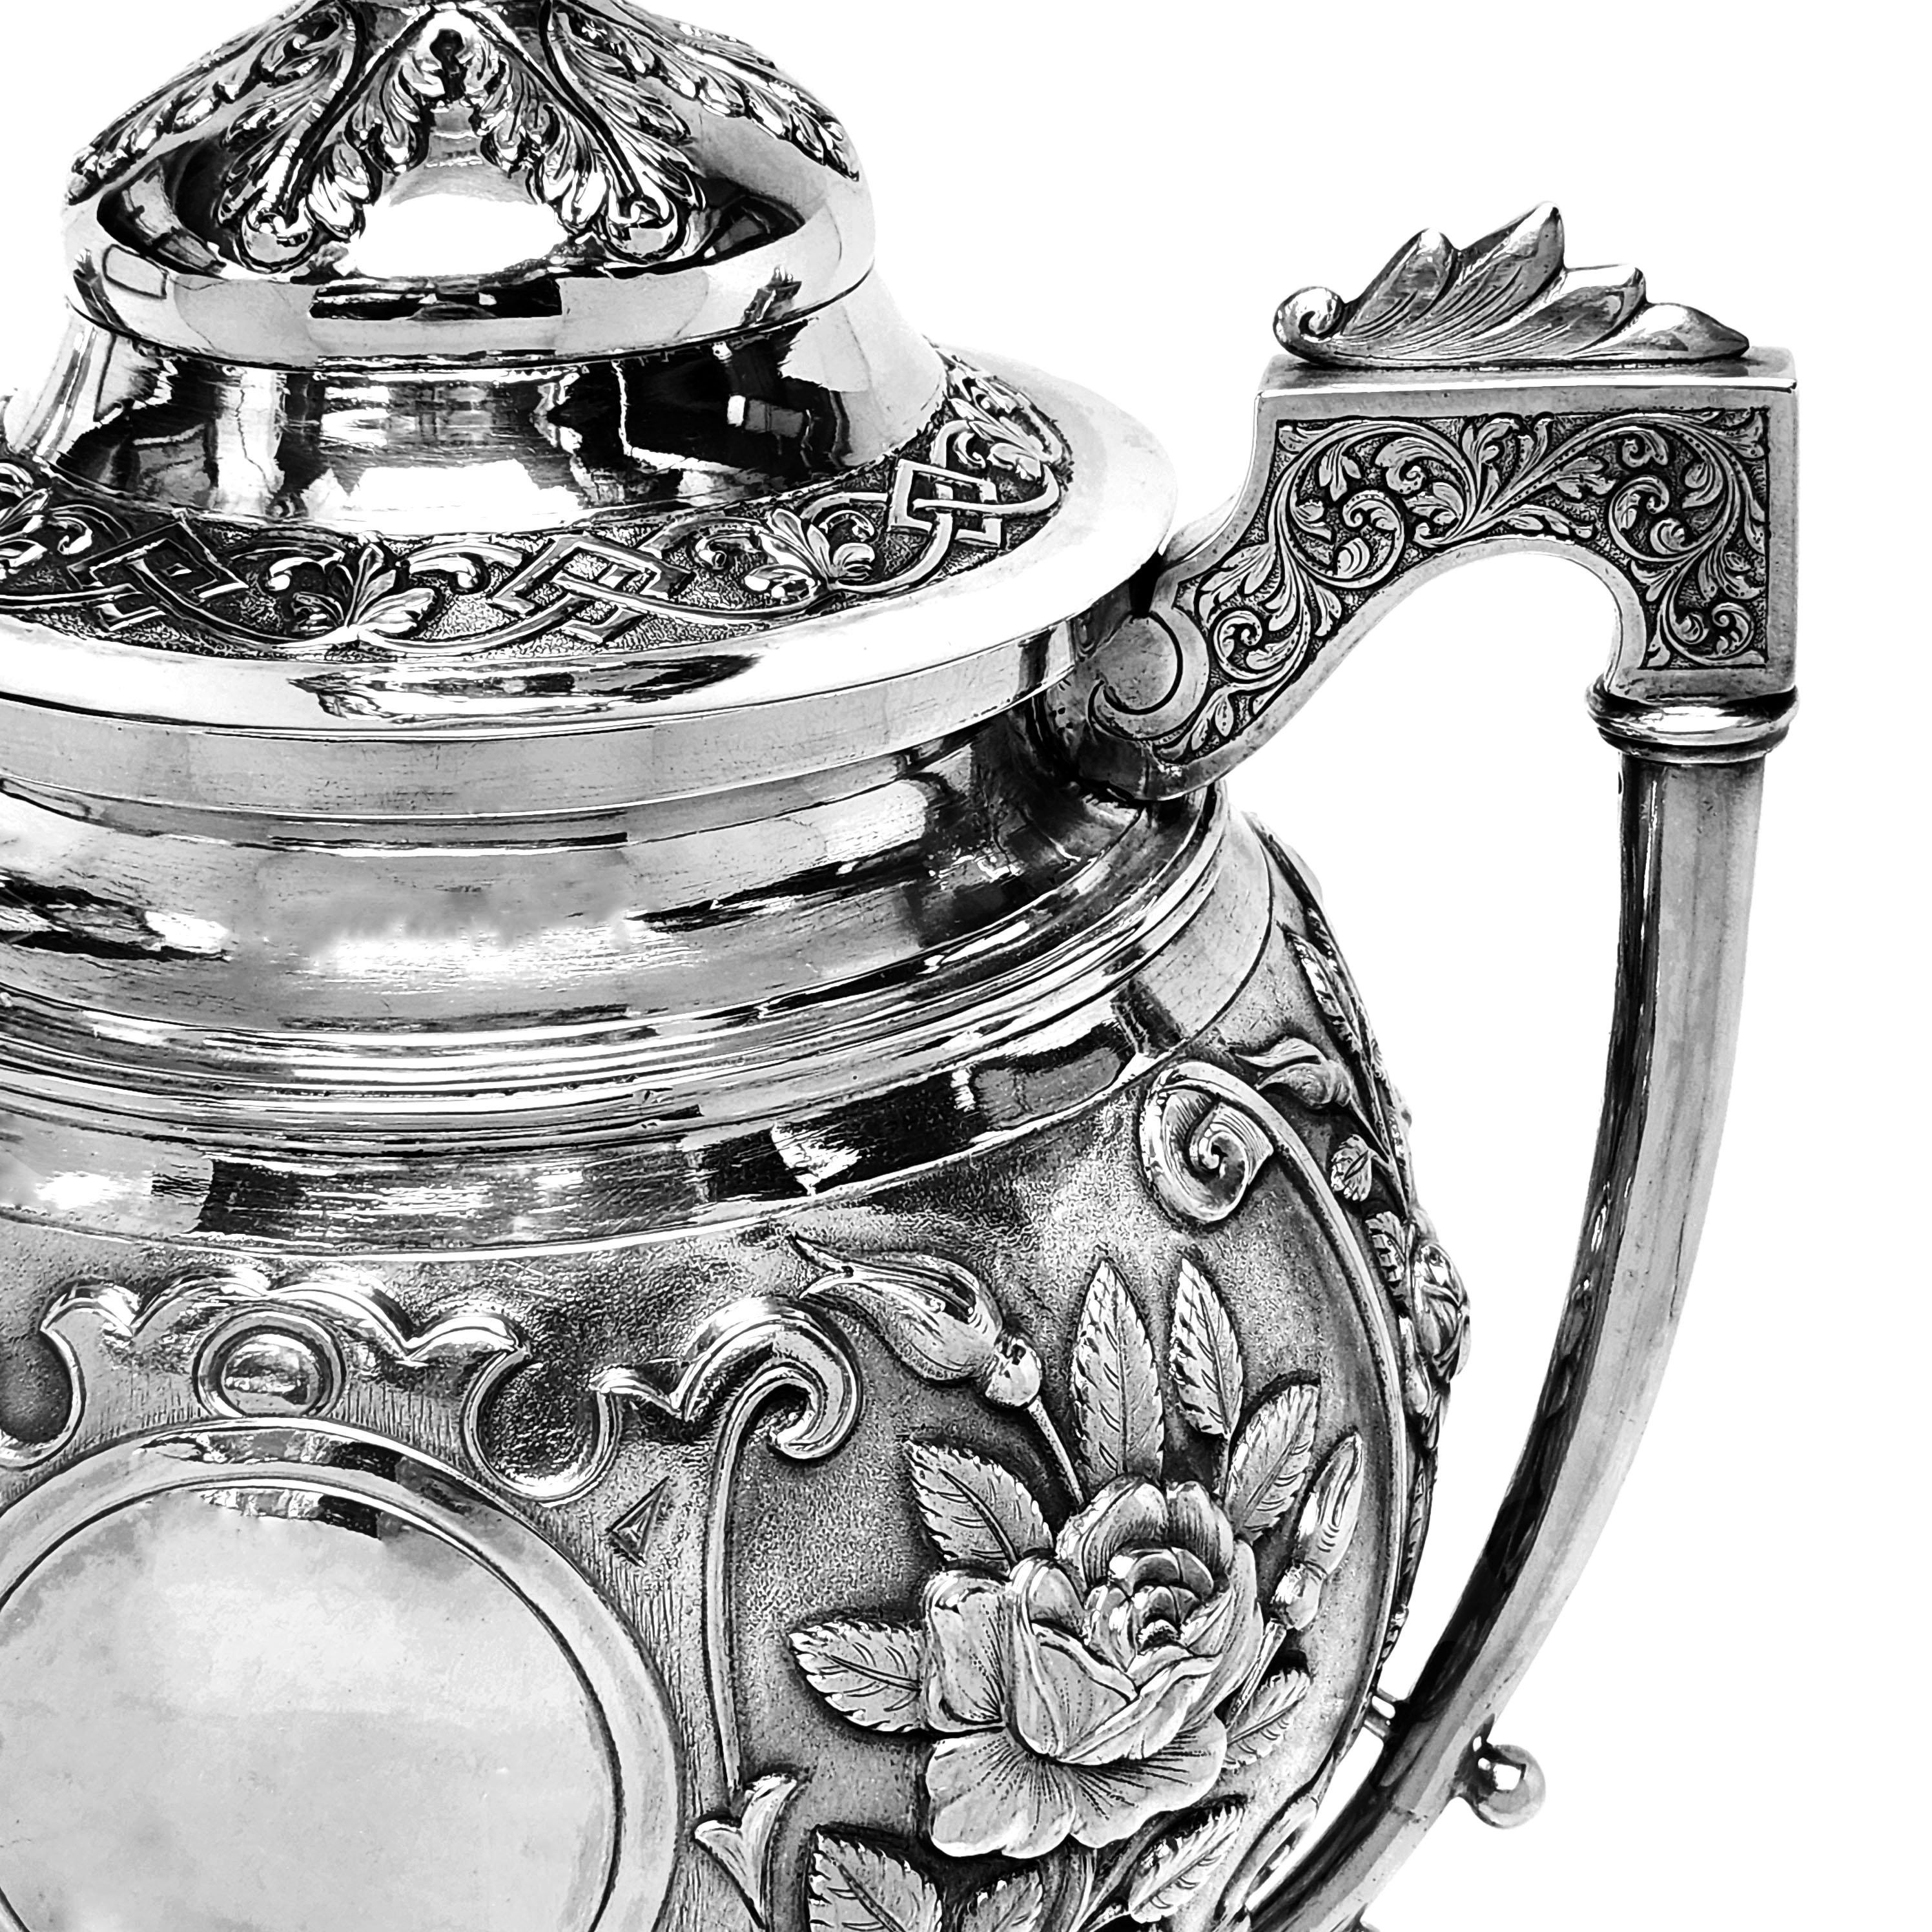 Antique Indian Silver Two Handled Cup & Cover c. 1925 Kolhapur Races For Sale 1